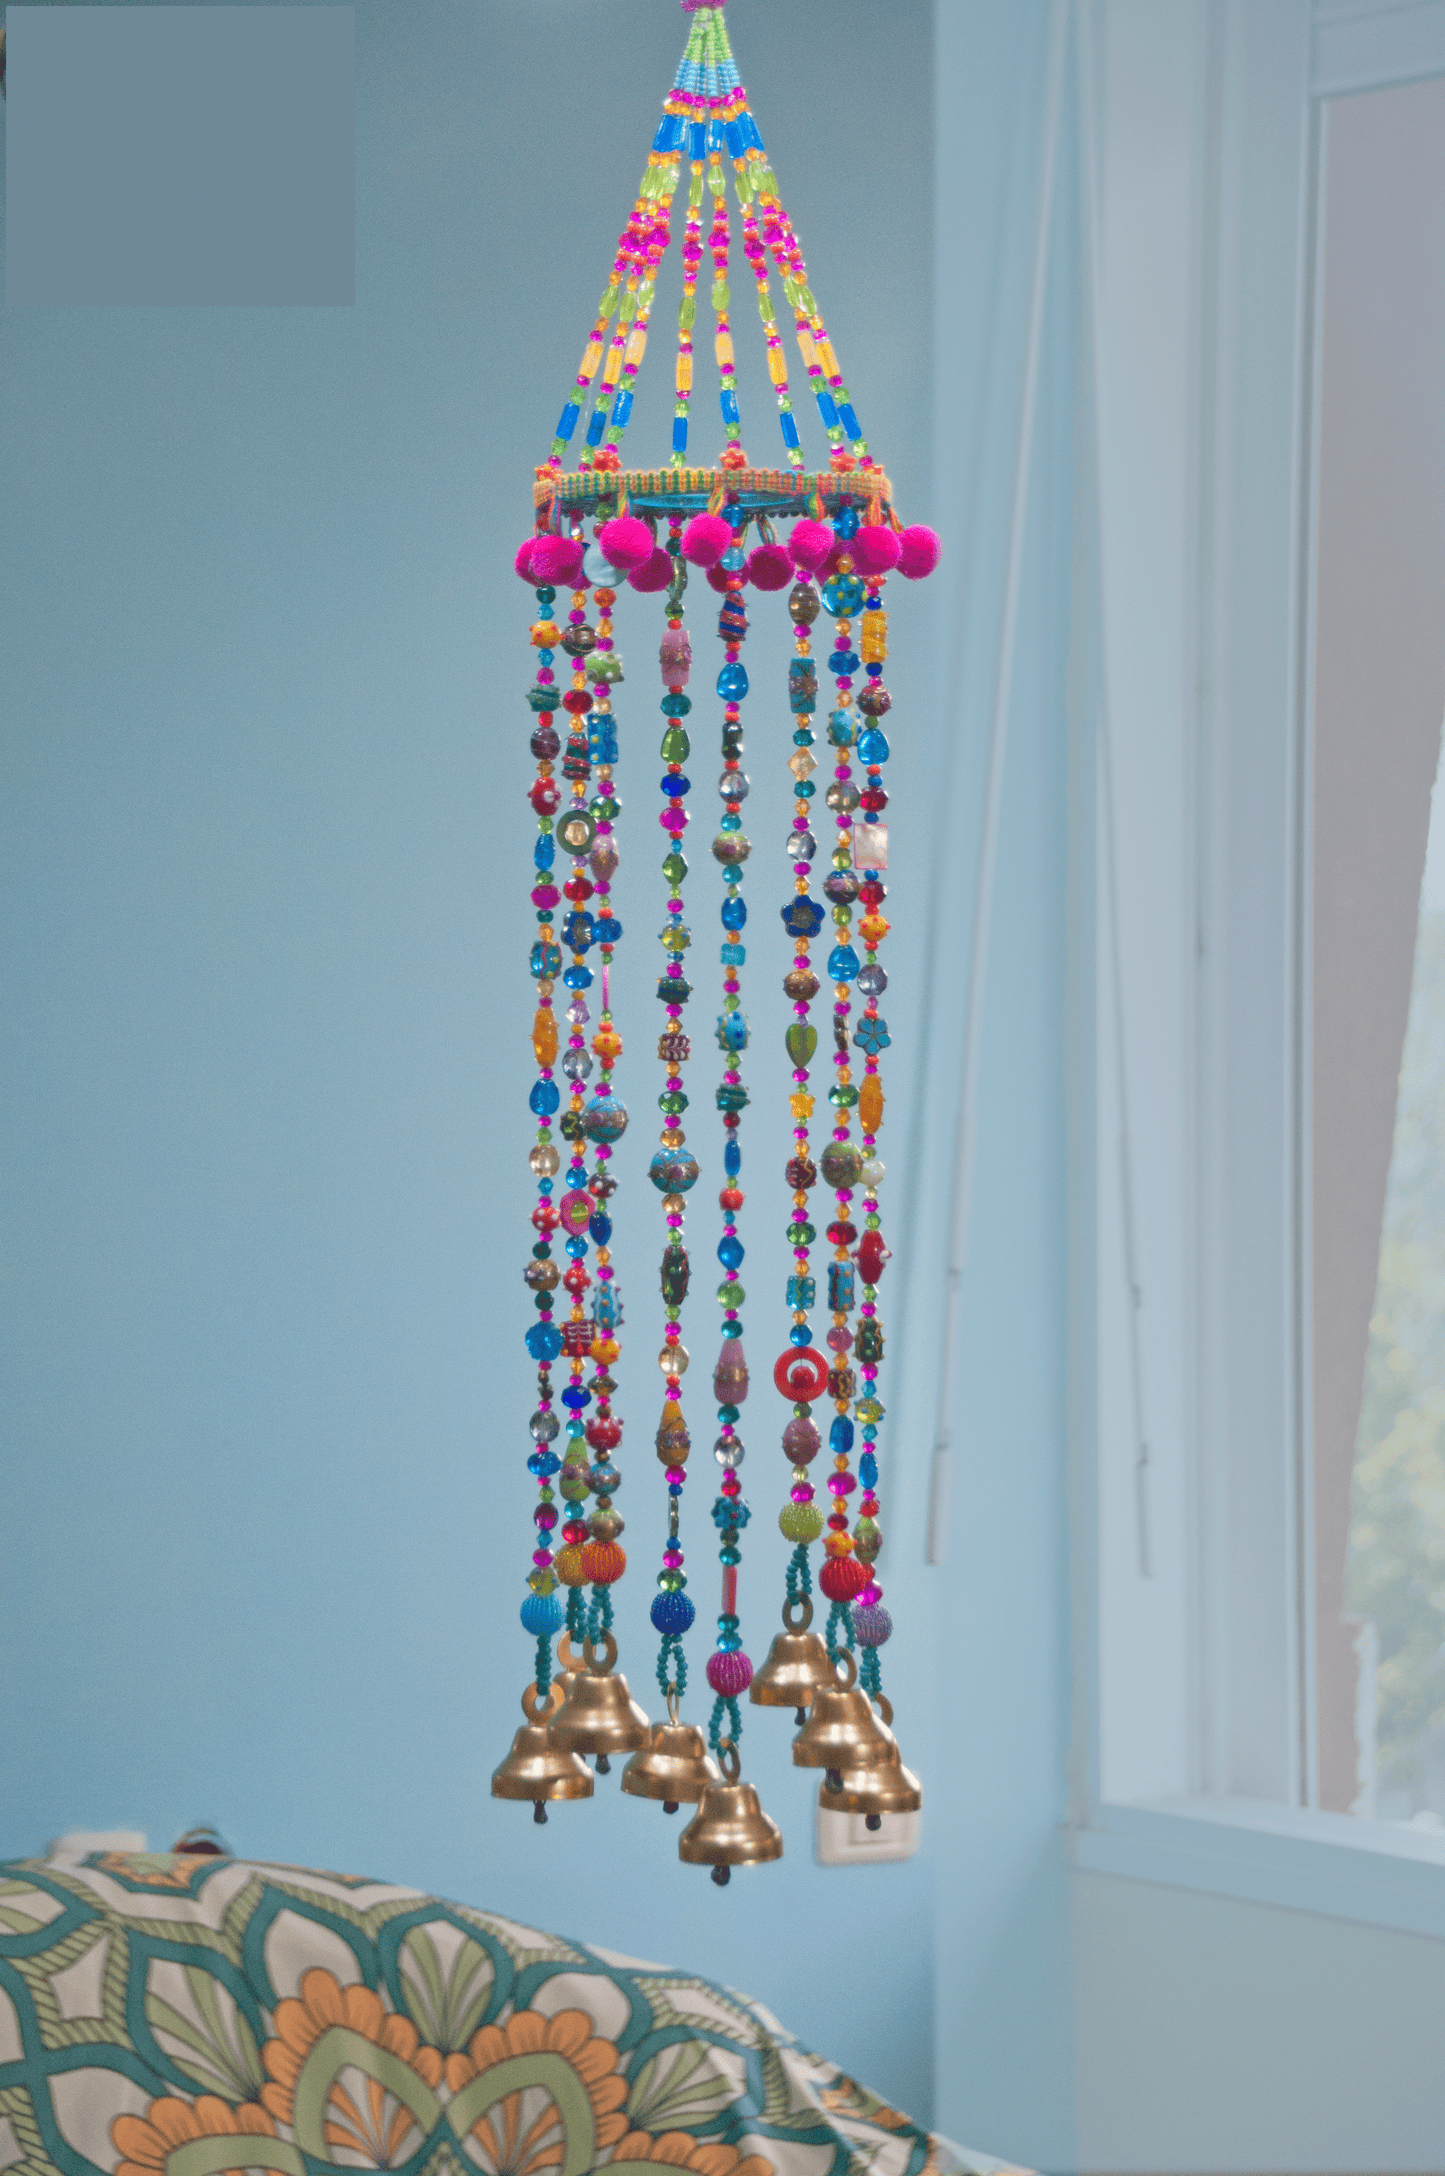 Bohemian beaded mobile with Brass bells-bohemian chic decor